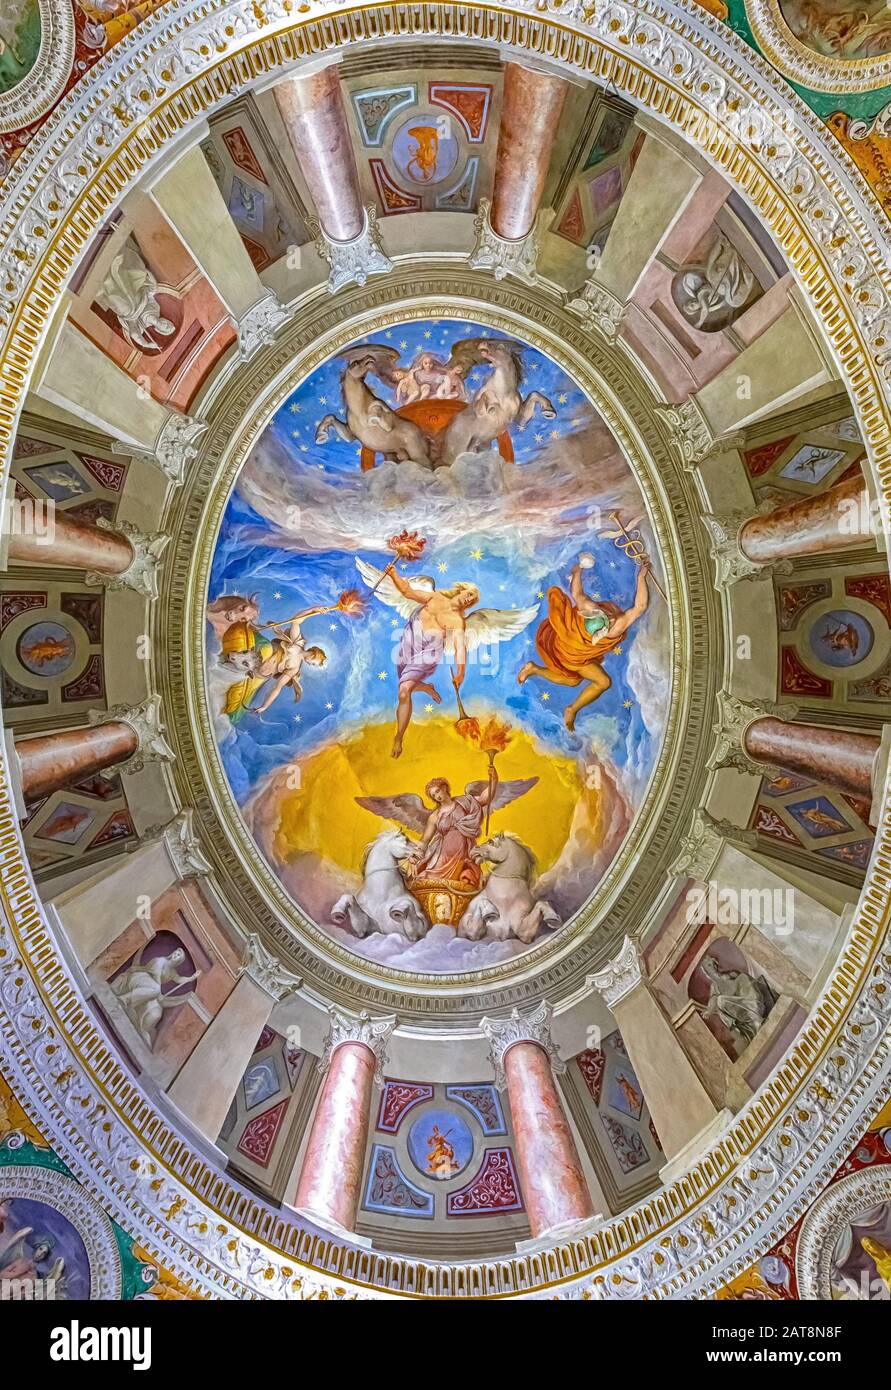 Caprarola (VT), Italy - January 27, 2020: Palazzo Farnese is located in the town of Caprarola near Viterbo, northern Lazio, Italy. Frescoed ceiling of the rooms on the main floor. Stock Photo